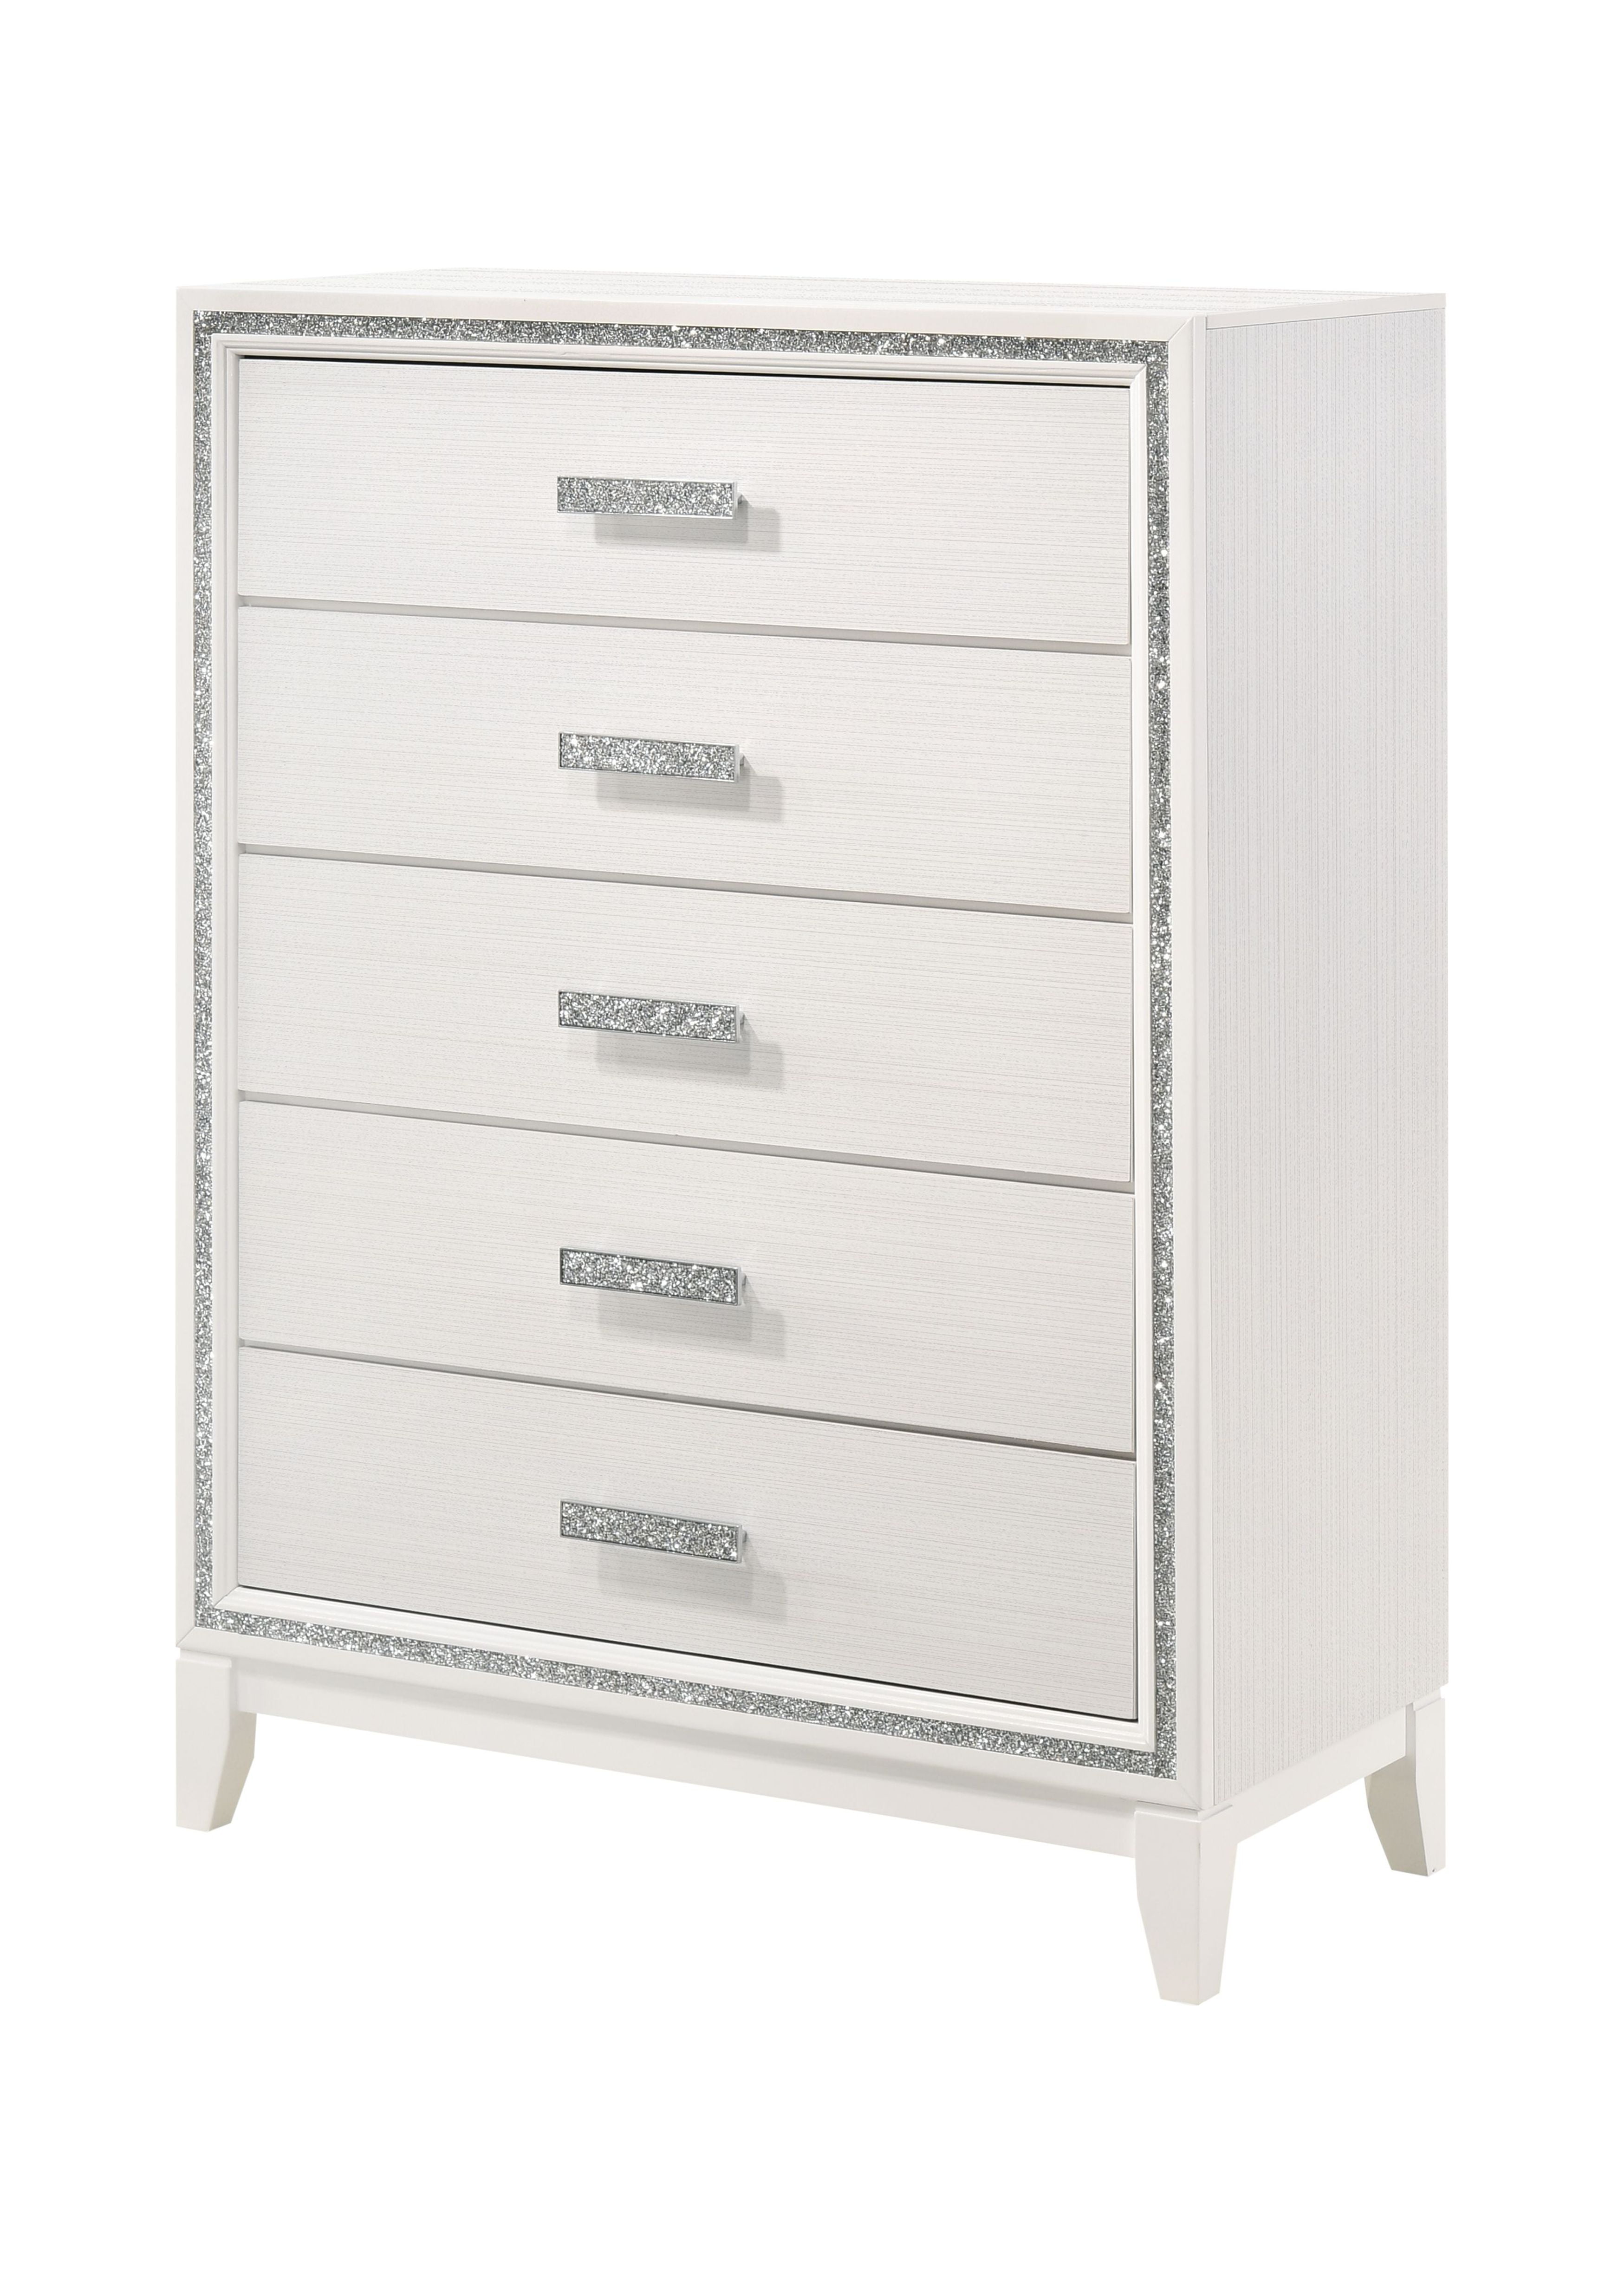 Picture of Acme Furniture 28456 35 x 17 x 50 in. Haiden Chest, White